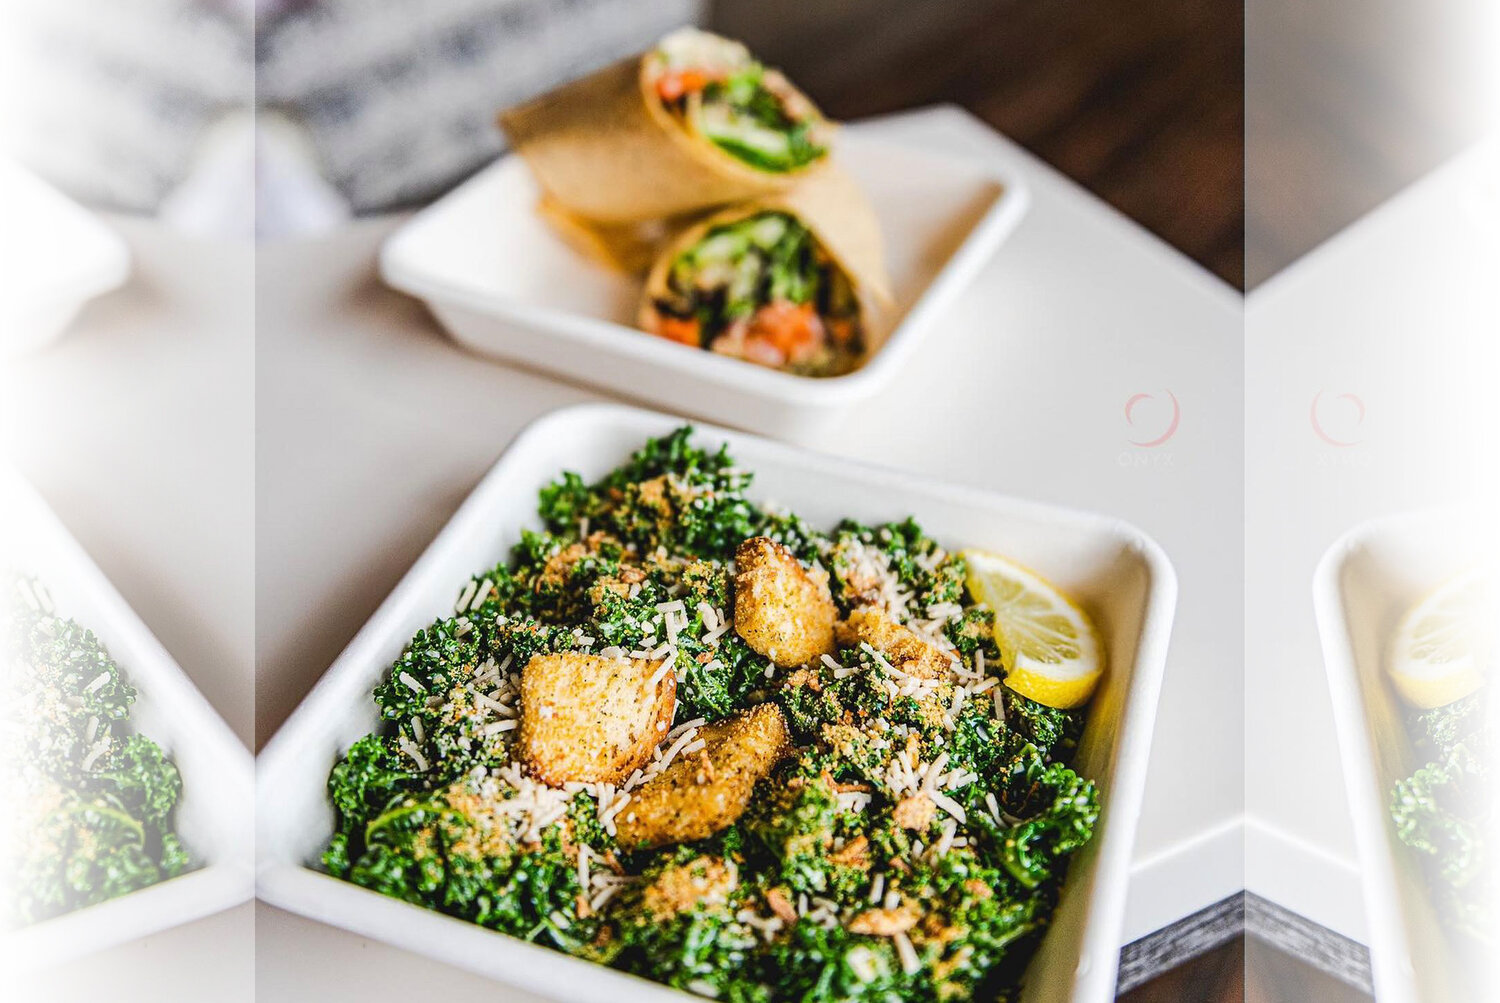 Along with kale salads featuring meatless chicken, Vita Sana is known for veggie wraps, toasts, and more